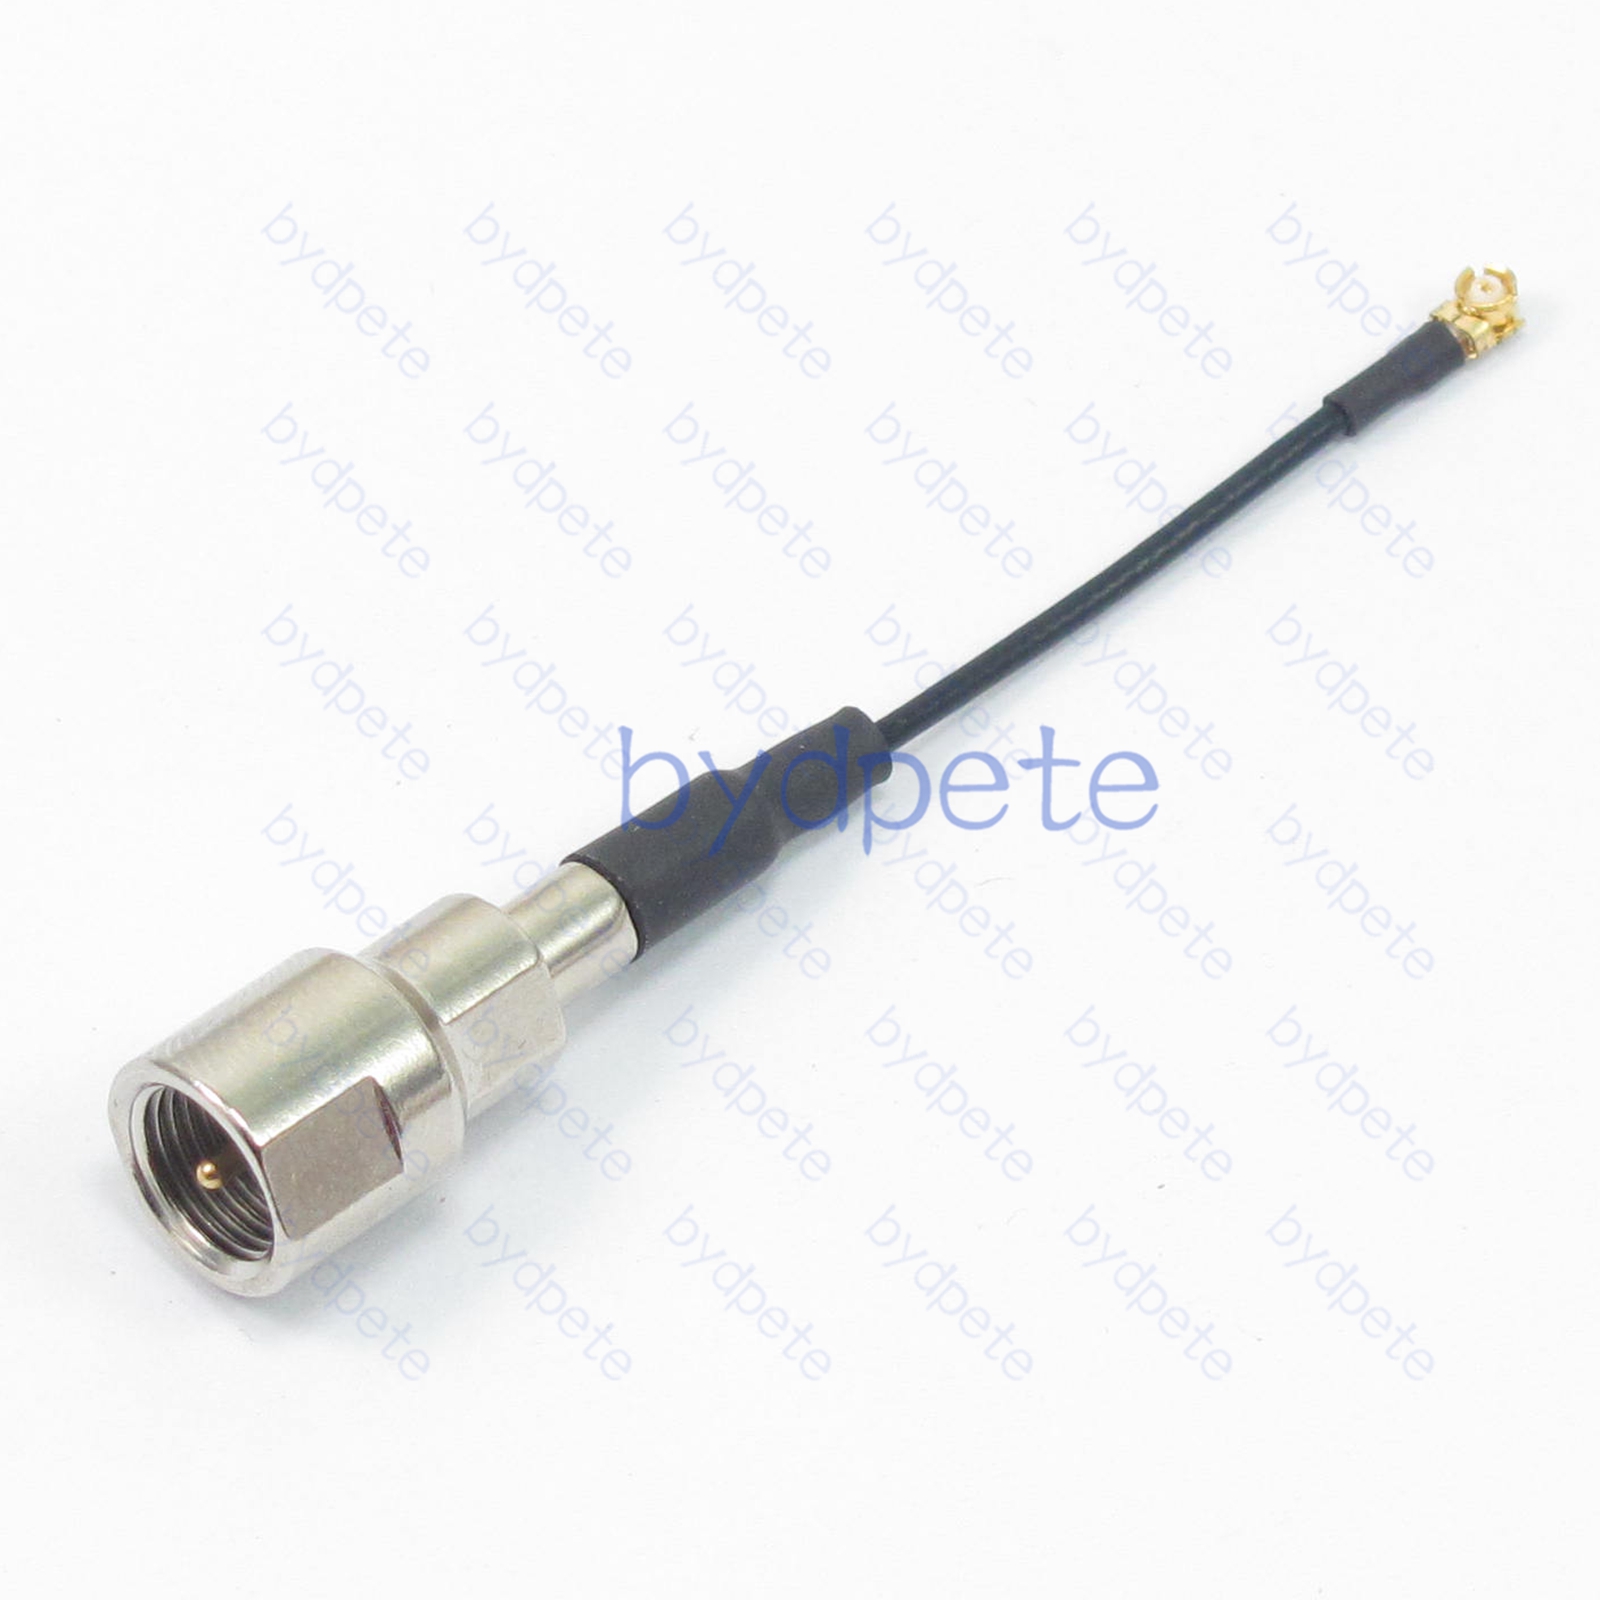 IPX IPEX UFL U.FL Plug to FME Male 1.37mm Pigtail cable Coaxial Koaxial Kable RF 50ohms bydpete